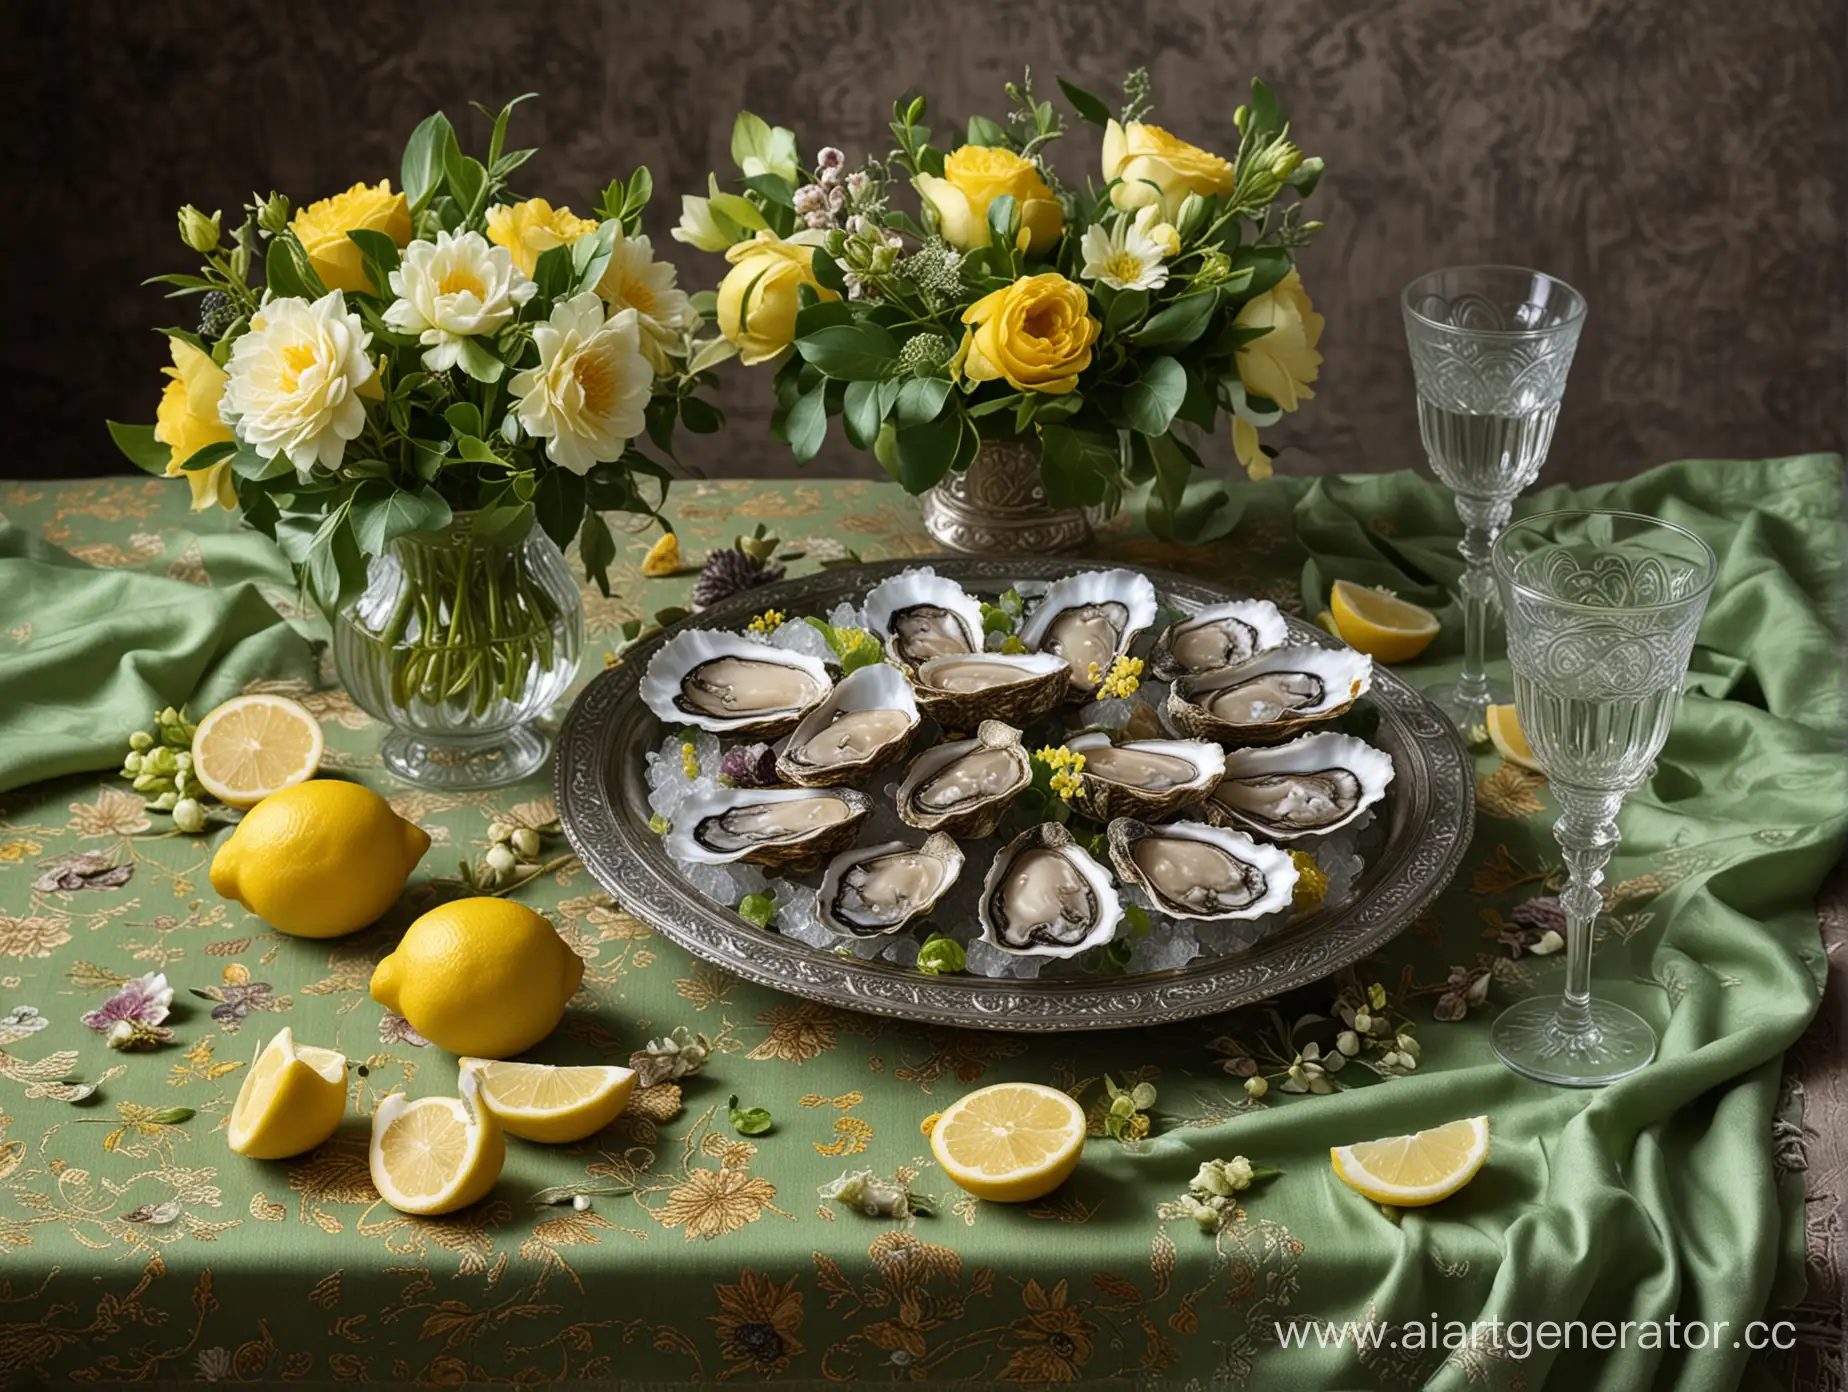 Turkish-Style-Still-Life-with-Oysters-Flowers-and-Lemon-on-a-Richly-Decorated-Table